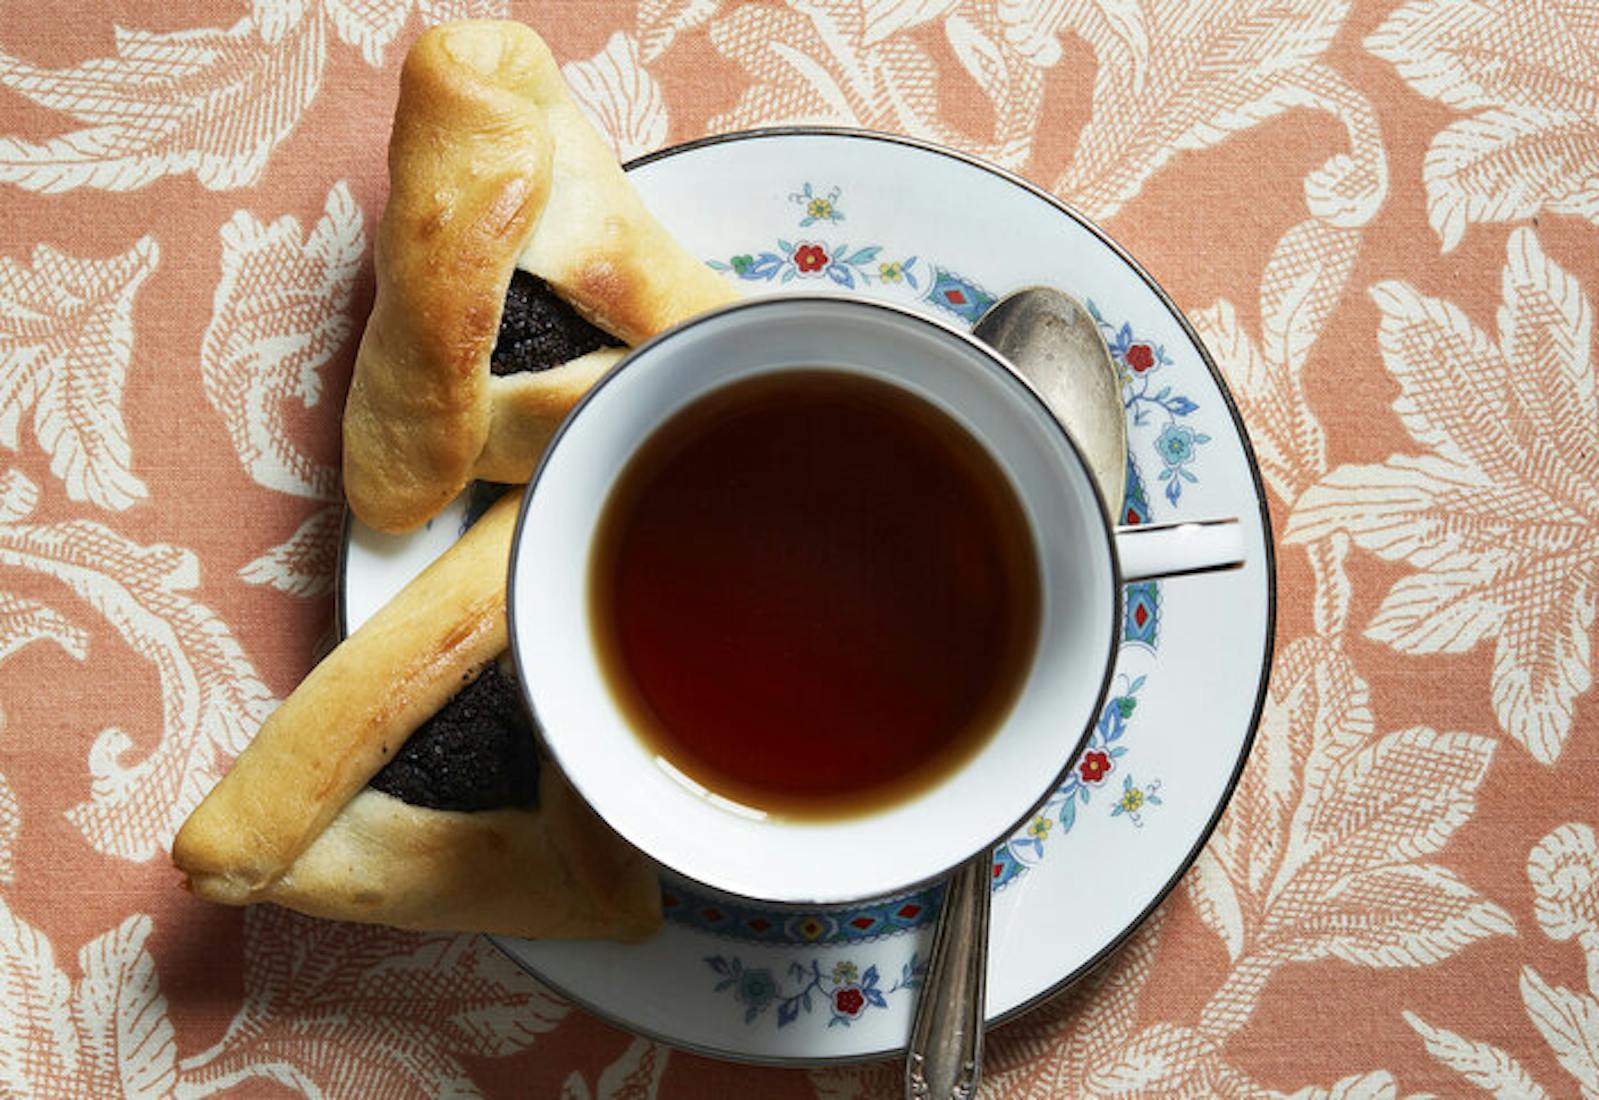 Poppy seed hamantaschen on plate with cup of tea, atop dark pink tablecloth.